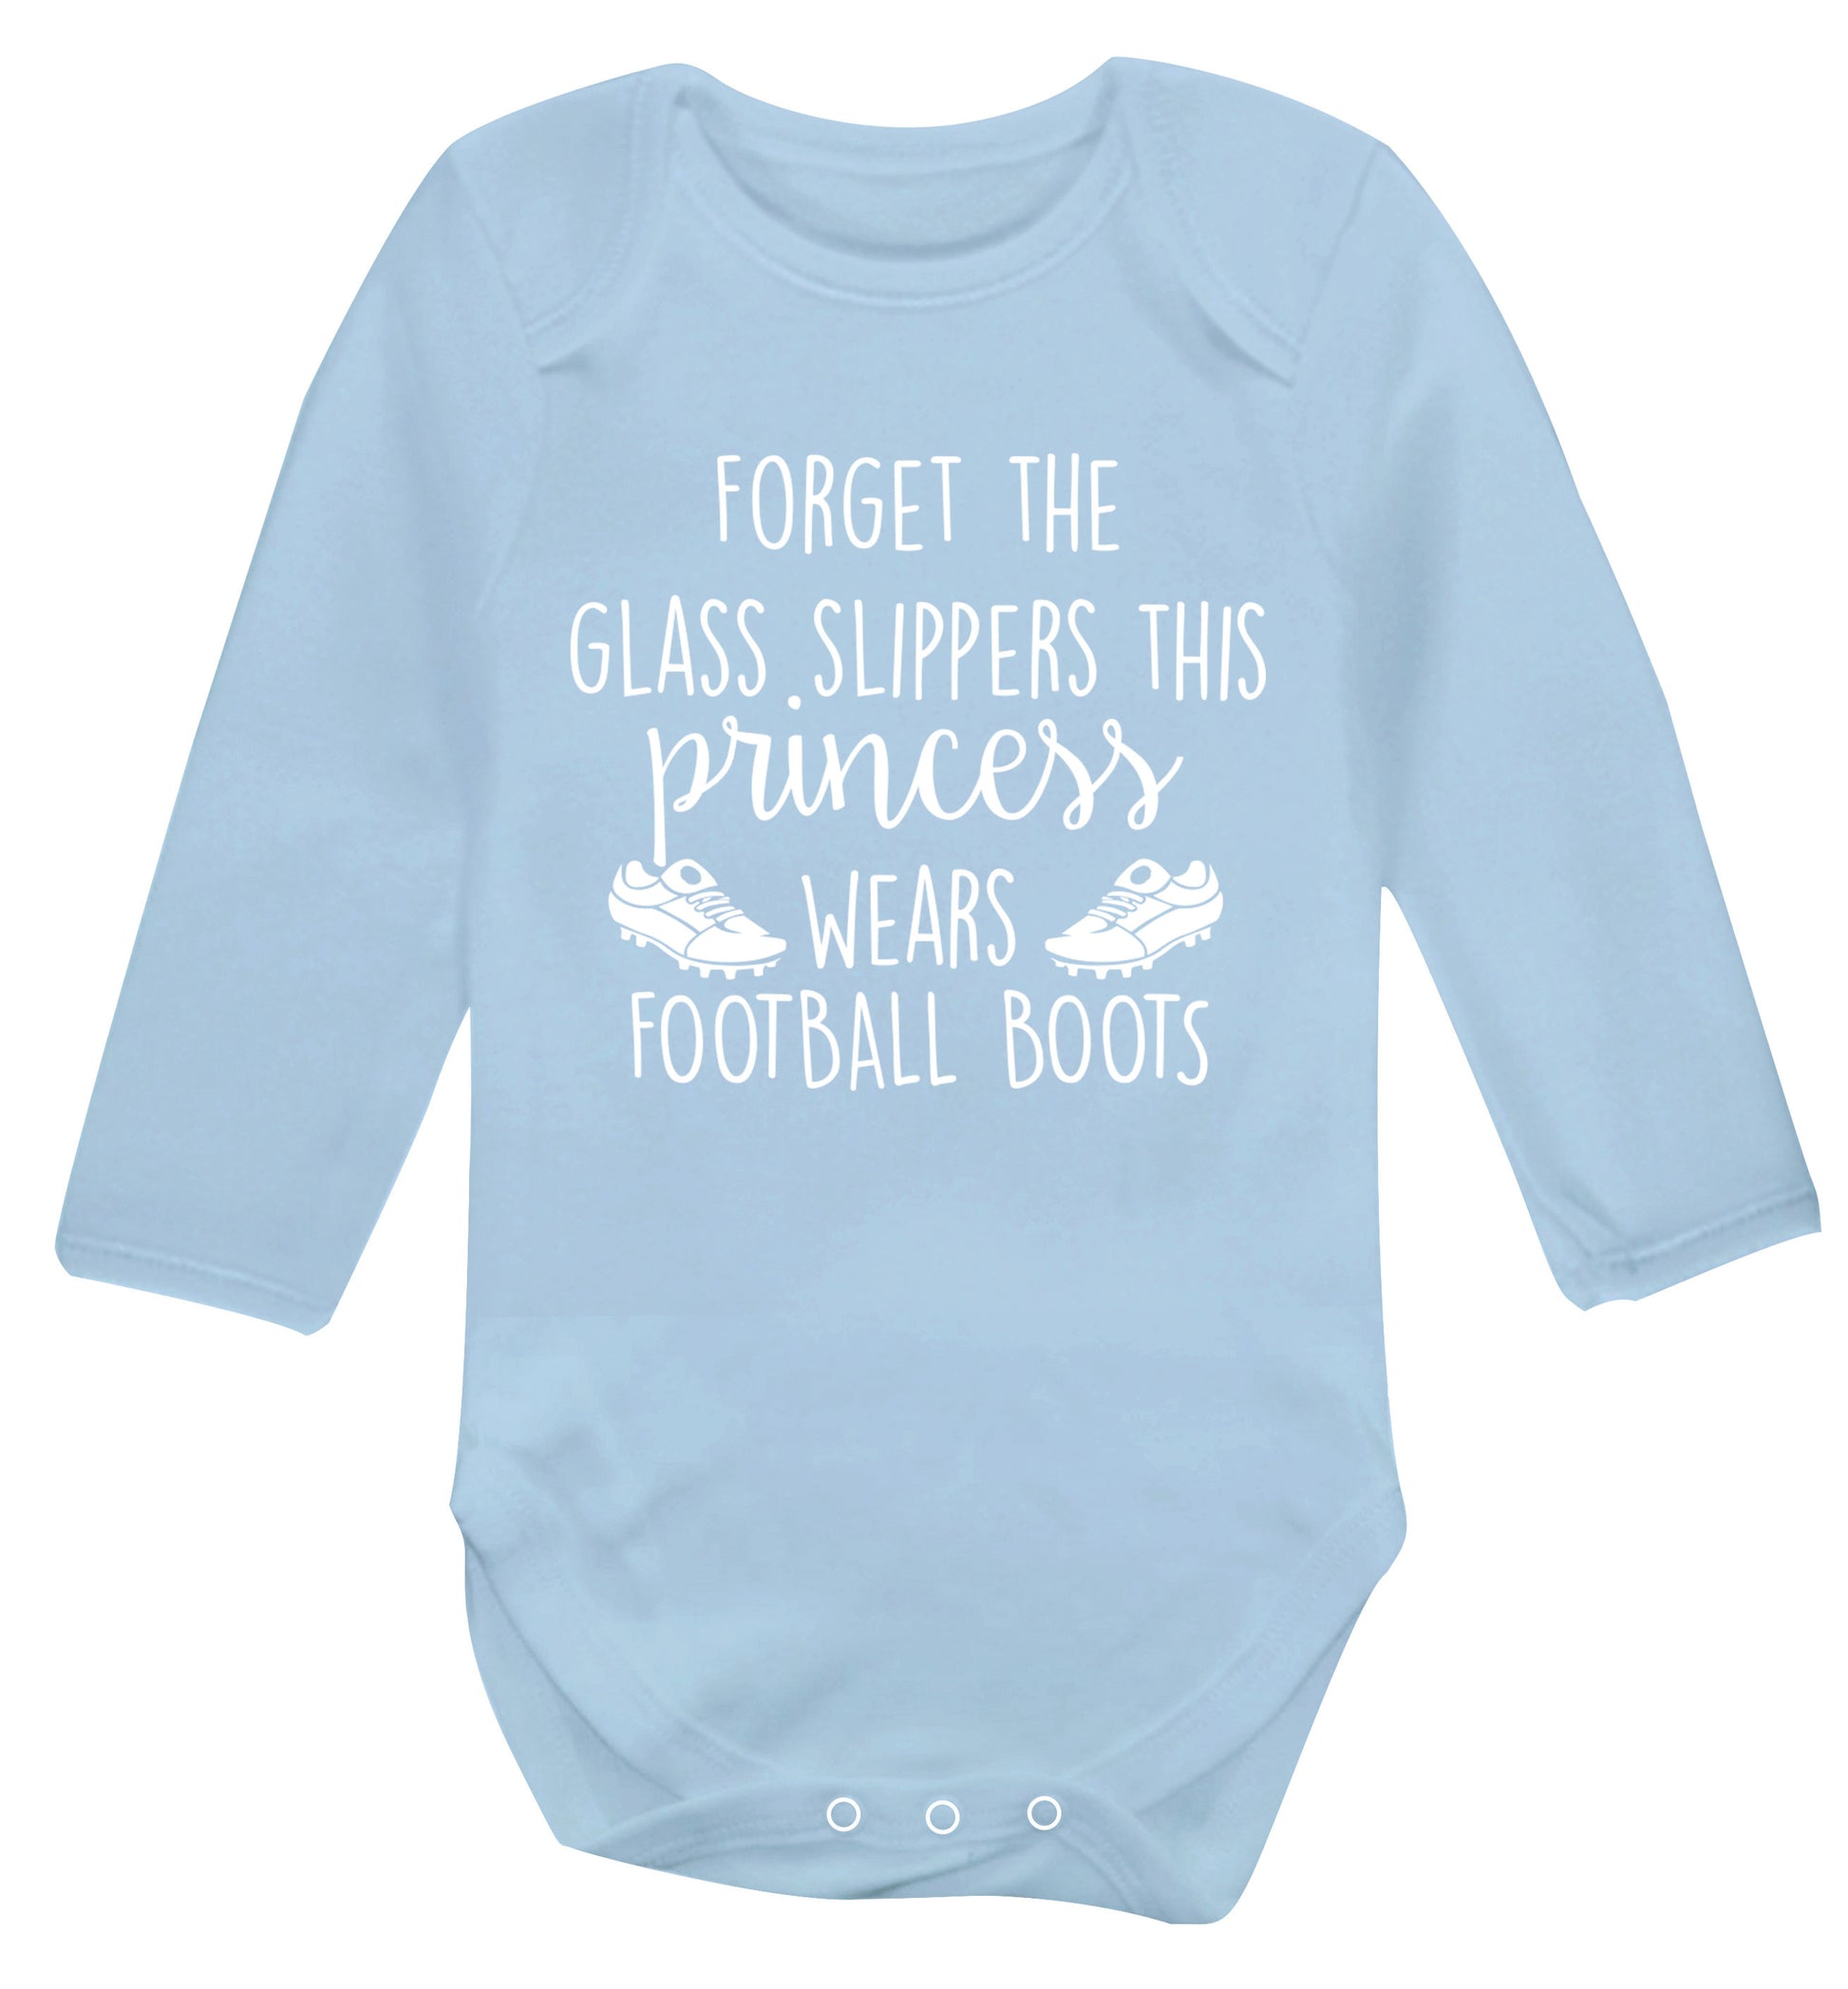 Forget the glass slippers this princess wears football boots Baby Vest long sleeved pale blue 6-12 months